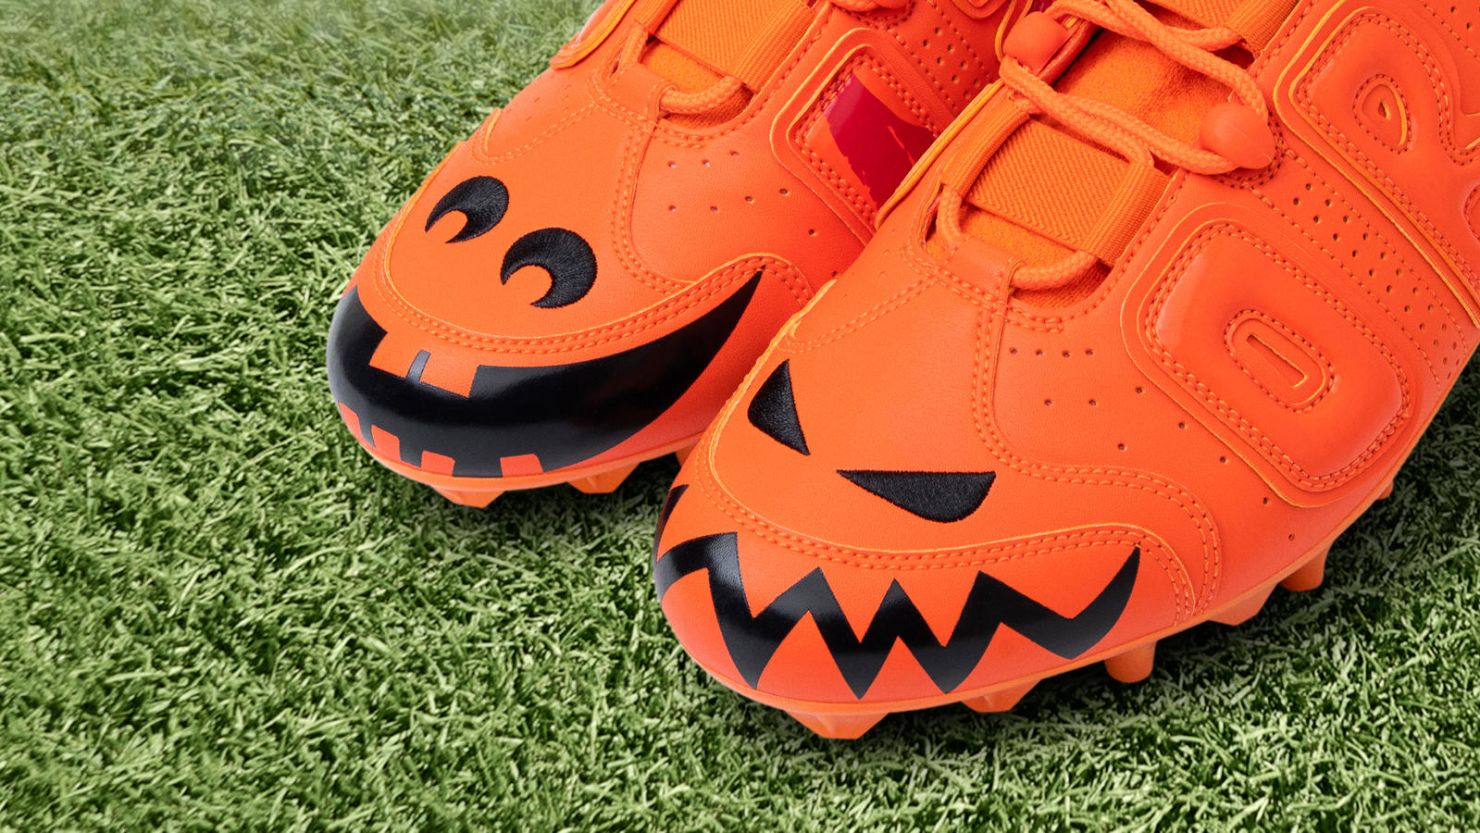 In Week 8 of his design partnership with Nike, Odell Beckham Jr. is wearing a pair of orange jack-o'-lantern cleats during the game.